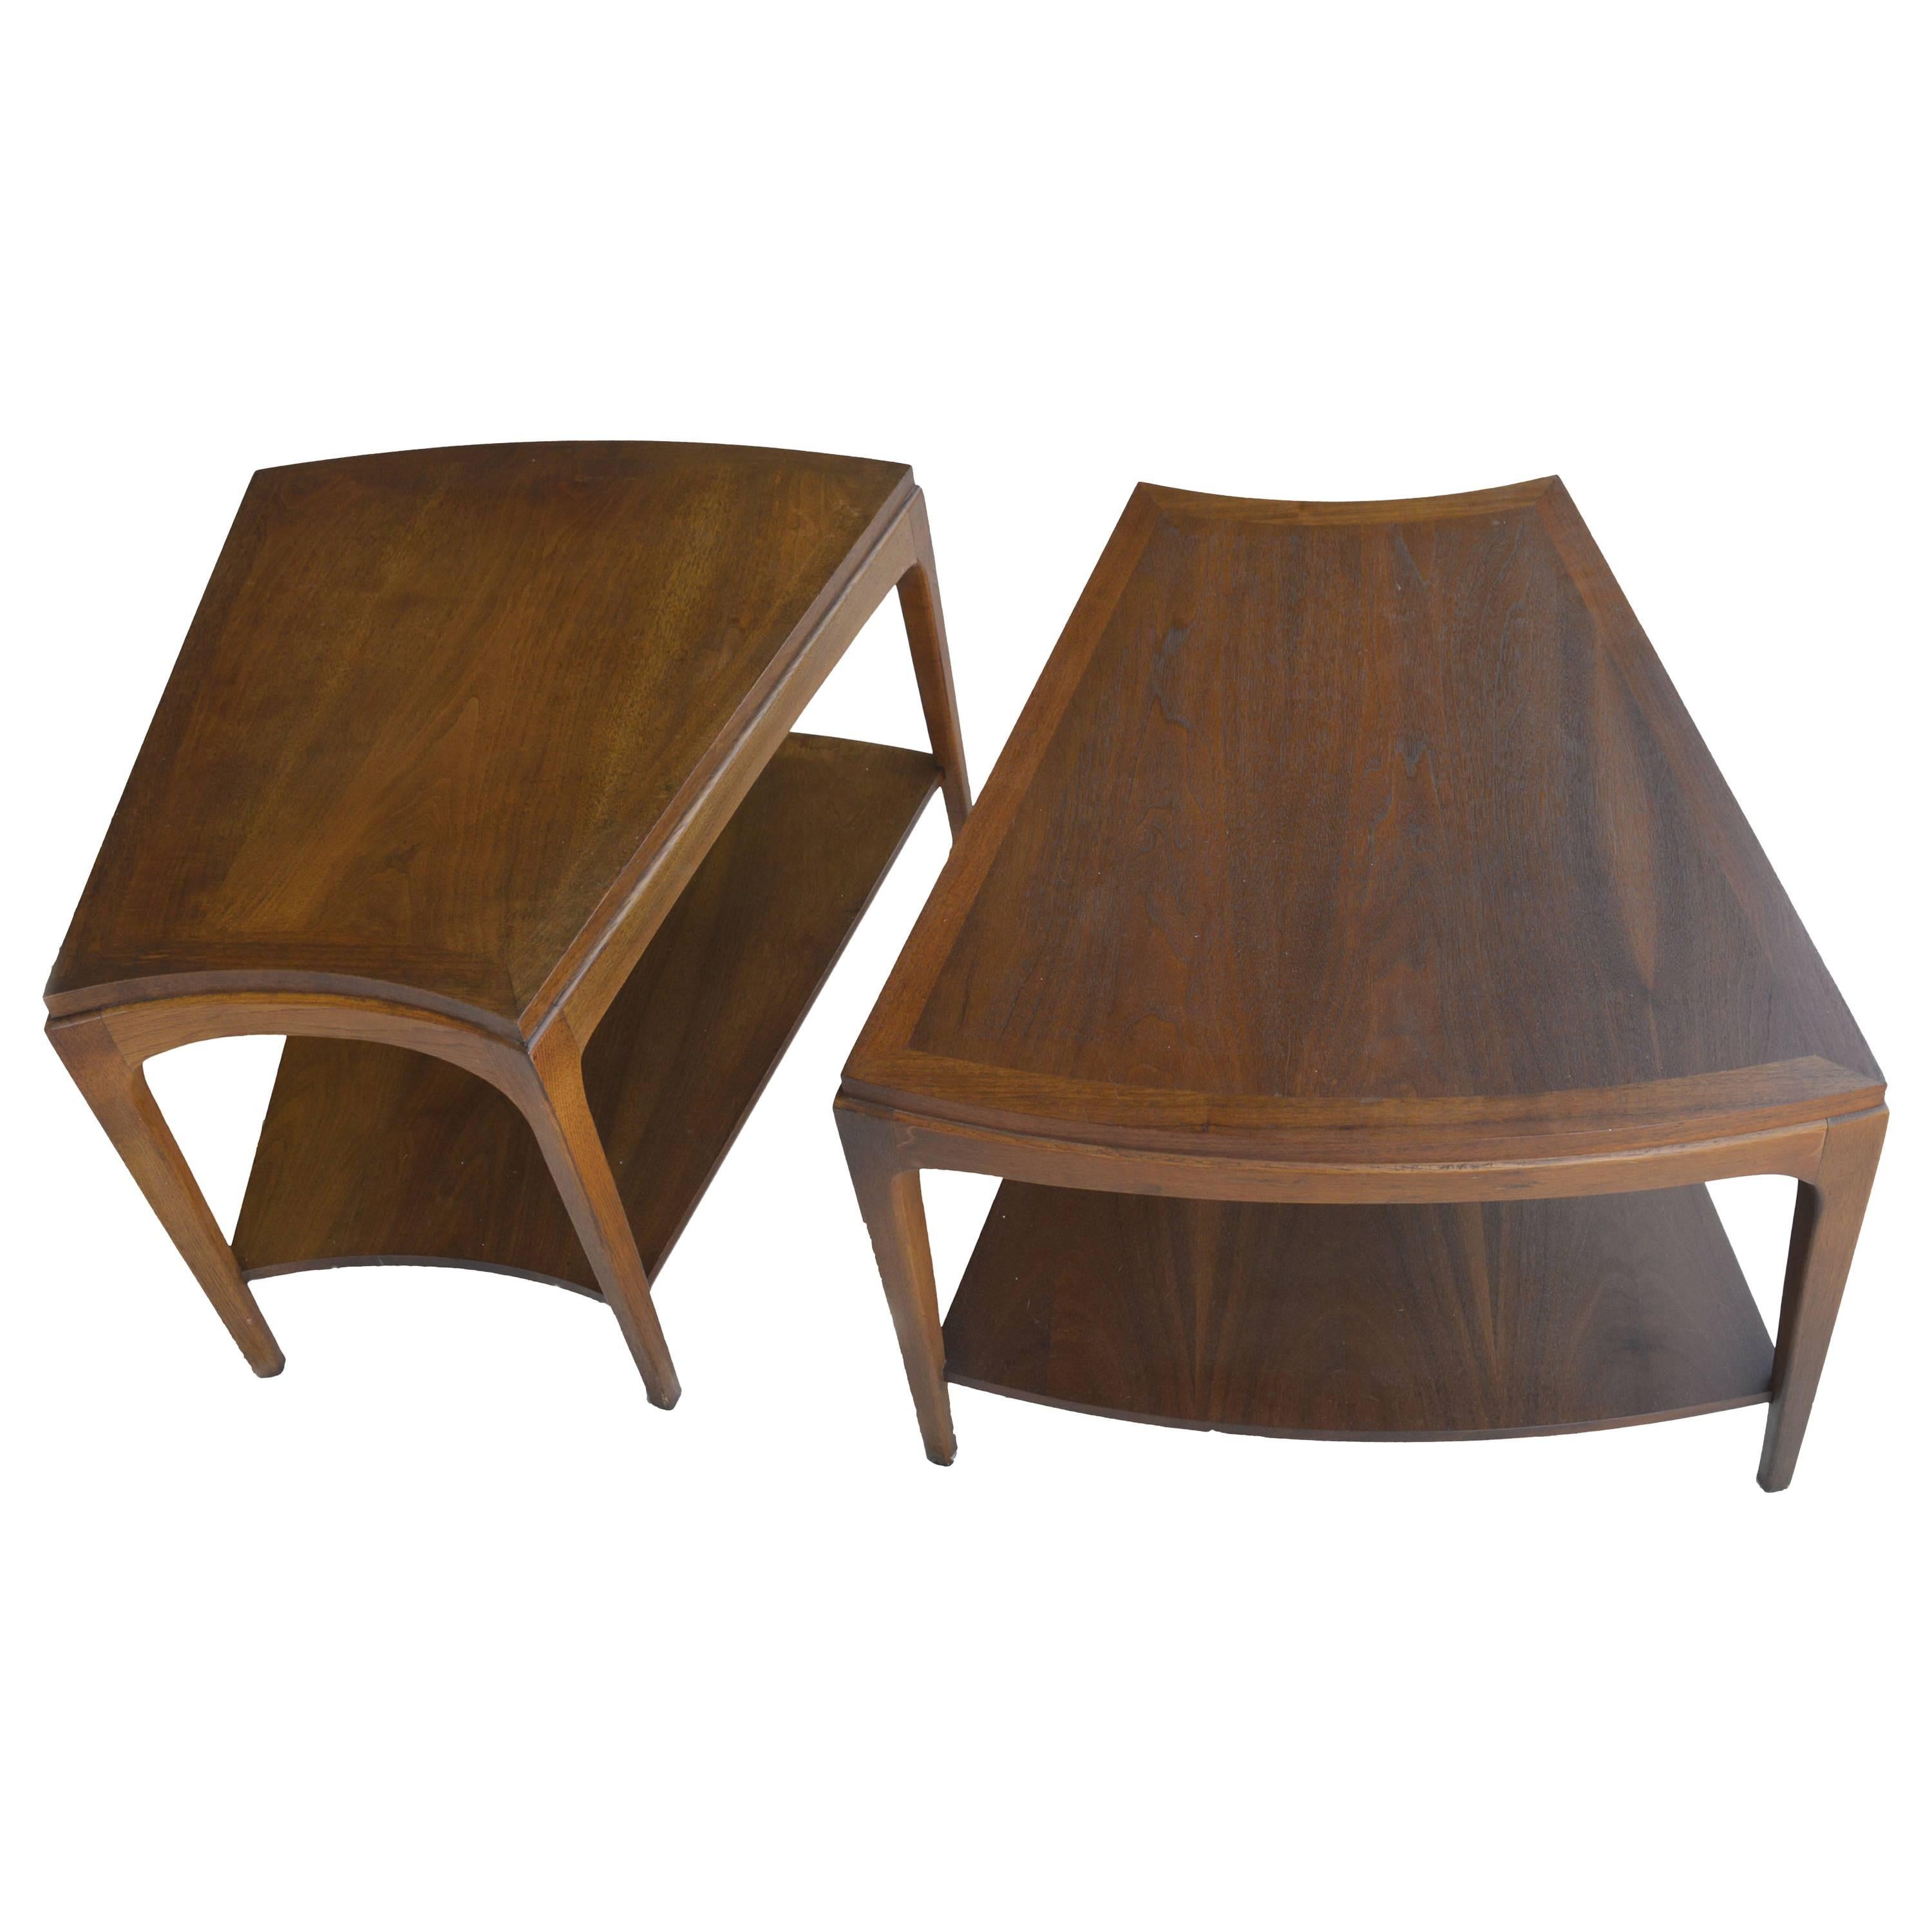 Pair of Wedge-Shaped the Wave Two-Tier Side Tables